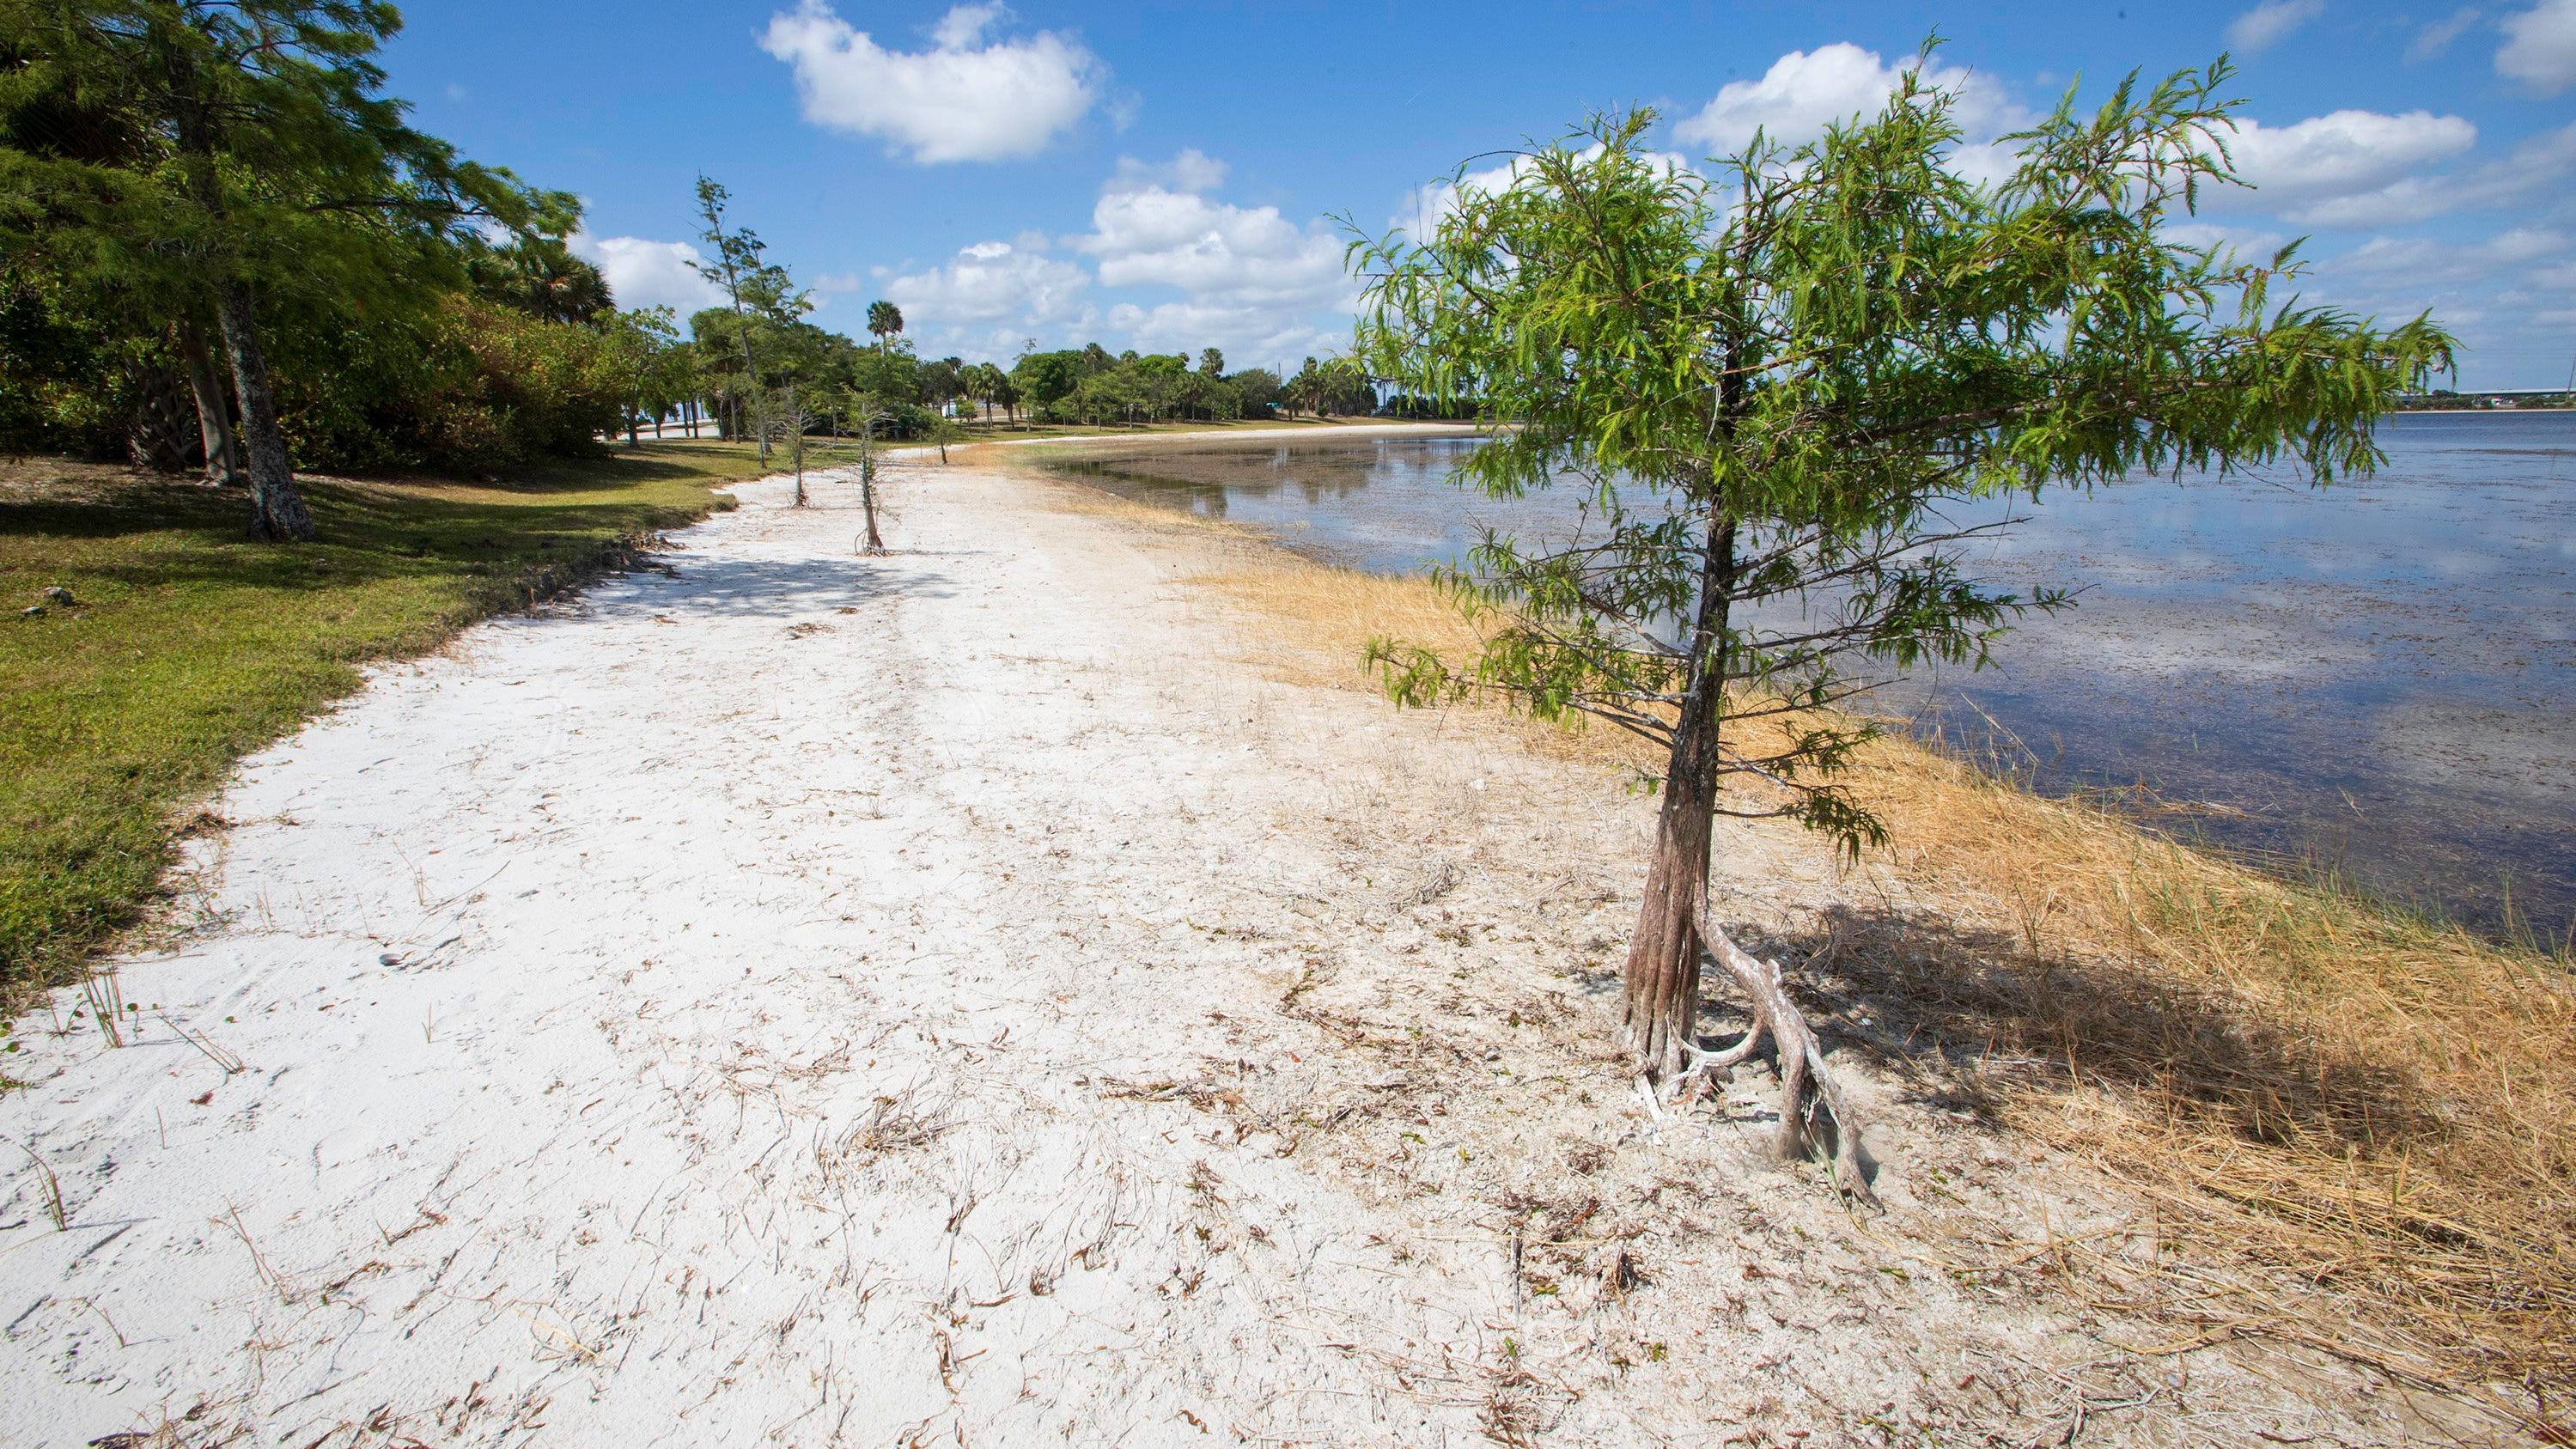 A water bond should be part of county's future - Palm Beach Post